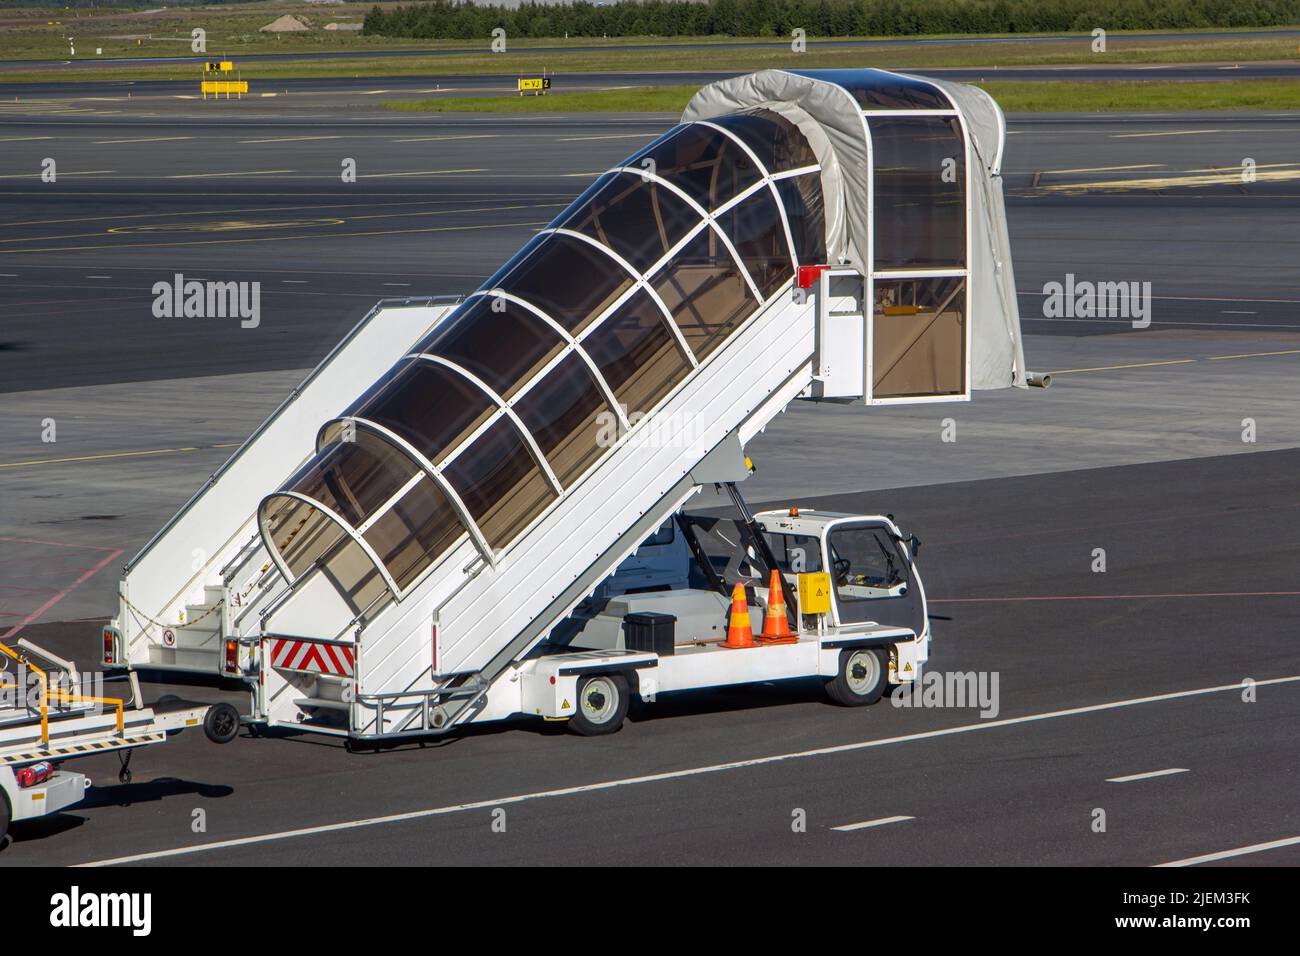 Mobile stairs for boarding and alighting passengers parked at the airport Stock Photo